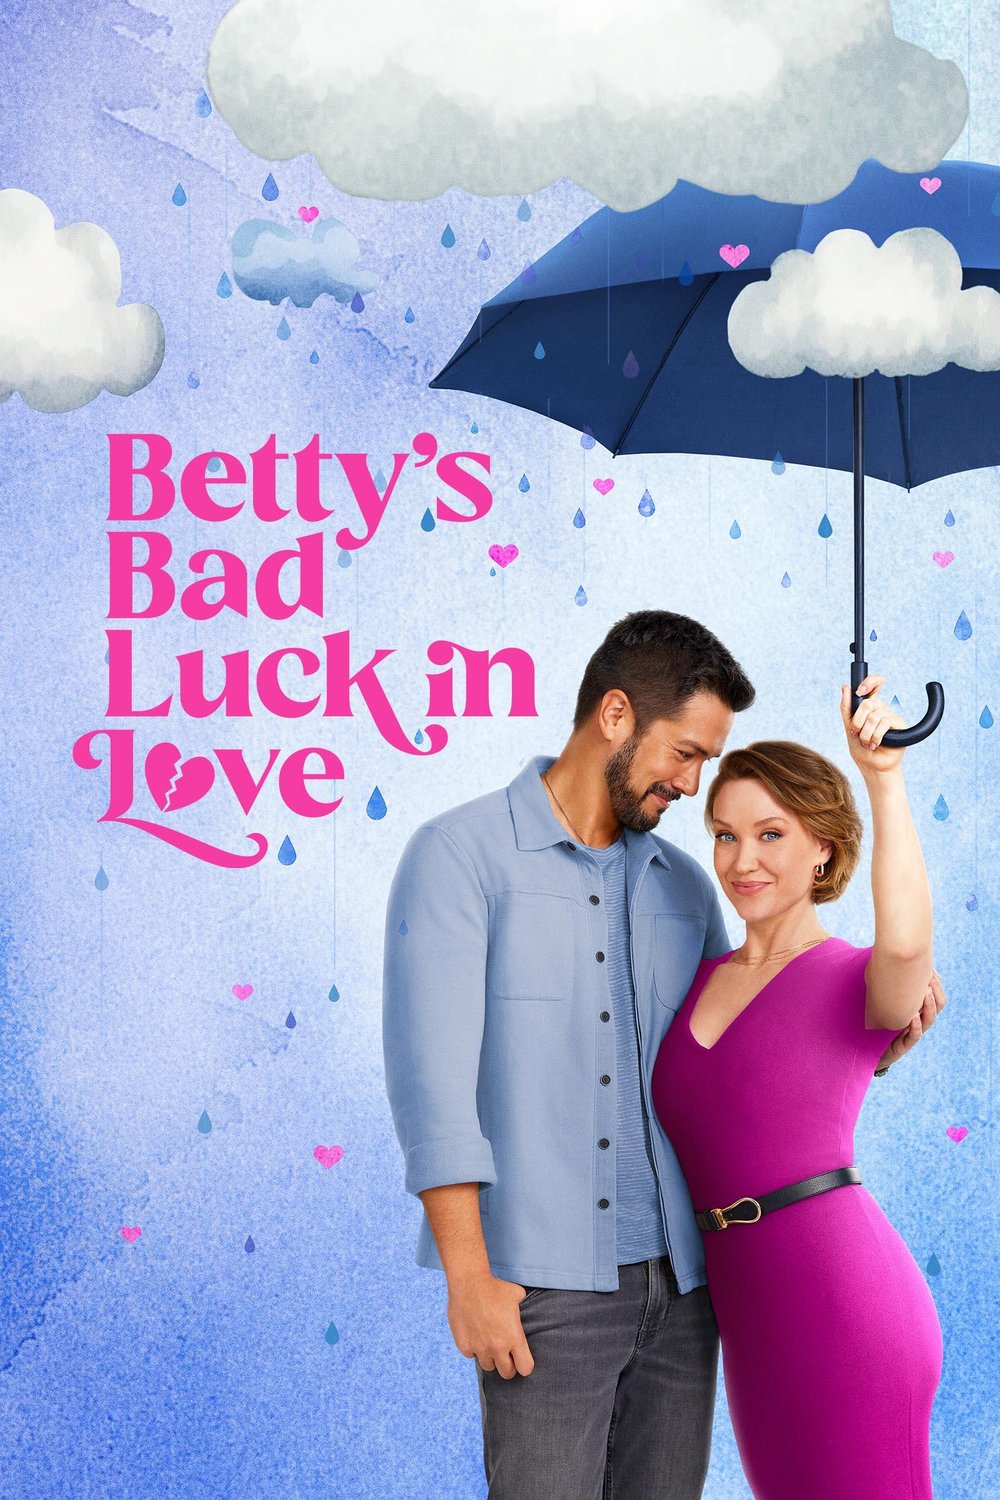 Poster of the movie Betty's Bad Luck in Love